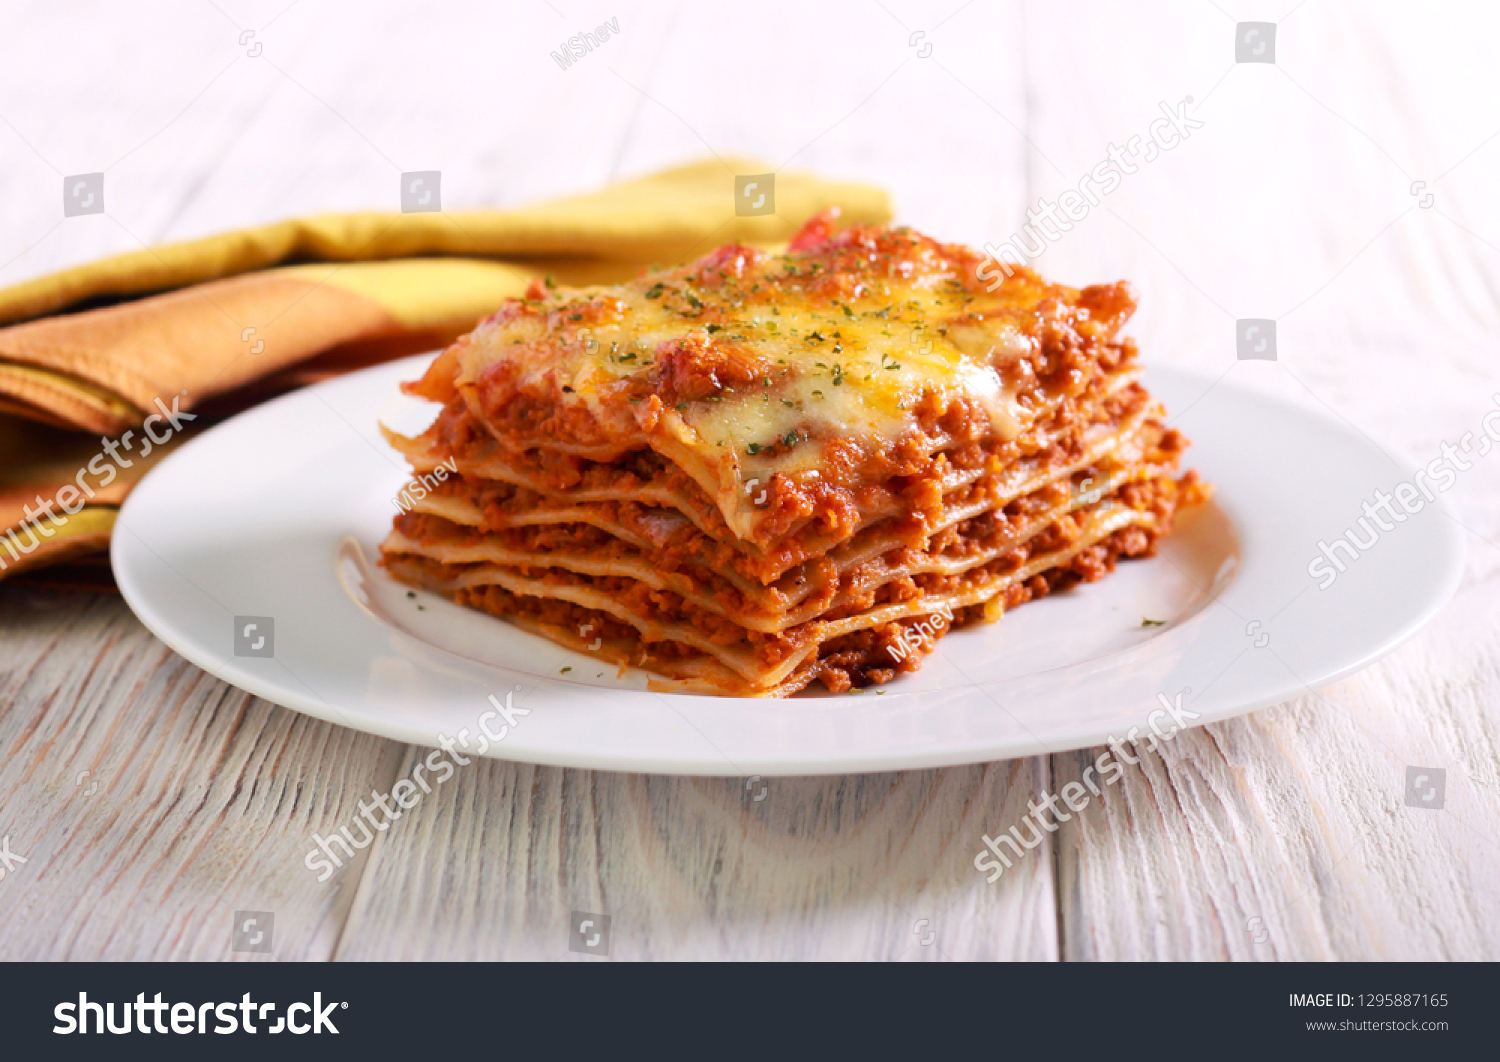 Slice of lasagna  on plate selective focus #1295887165